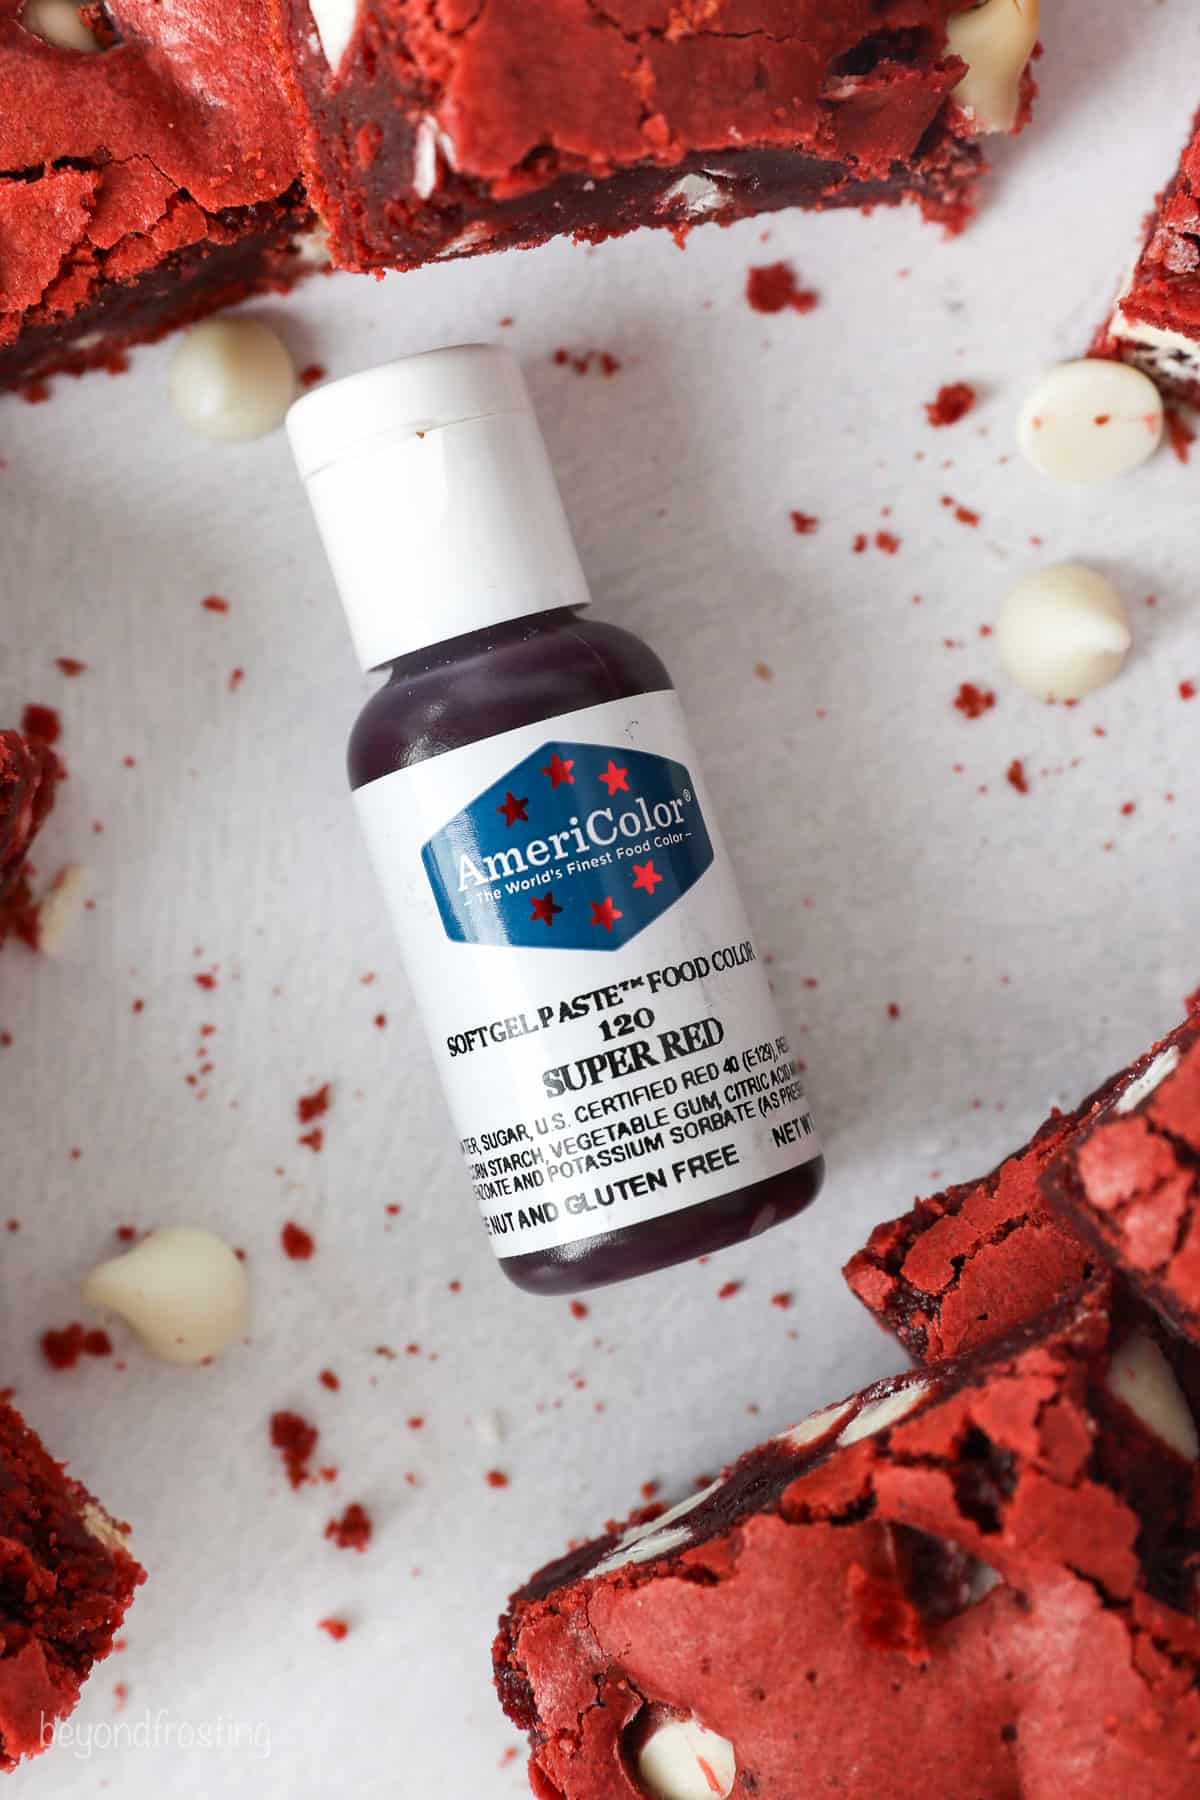 Overhead view of a bottle of AmeriColor red gel food coloring on its side, surrounded by red velvet brownies.